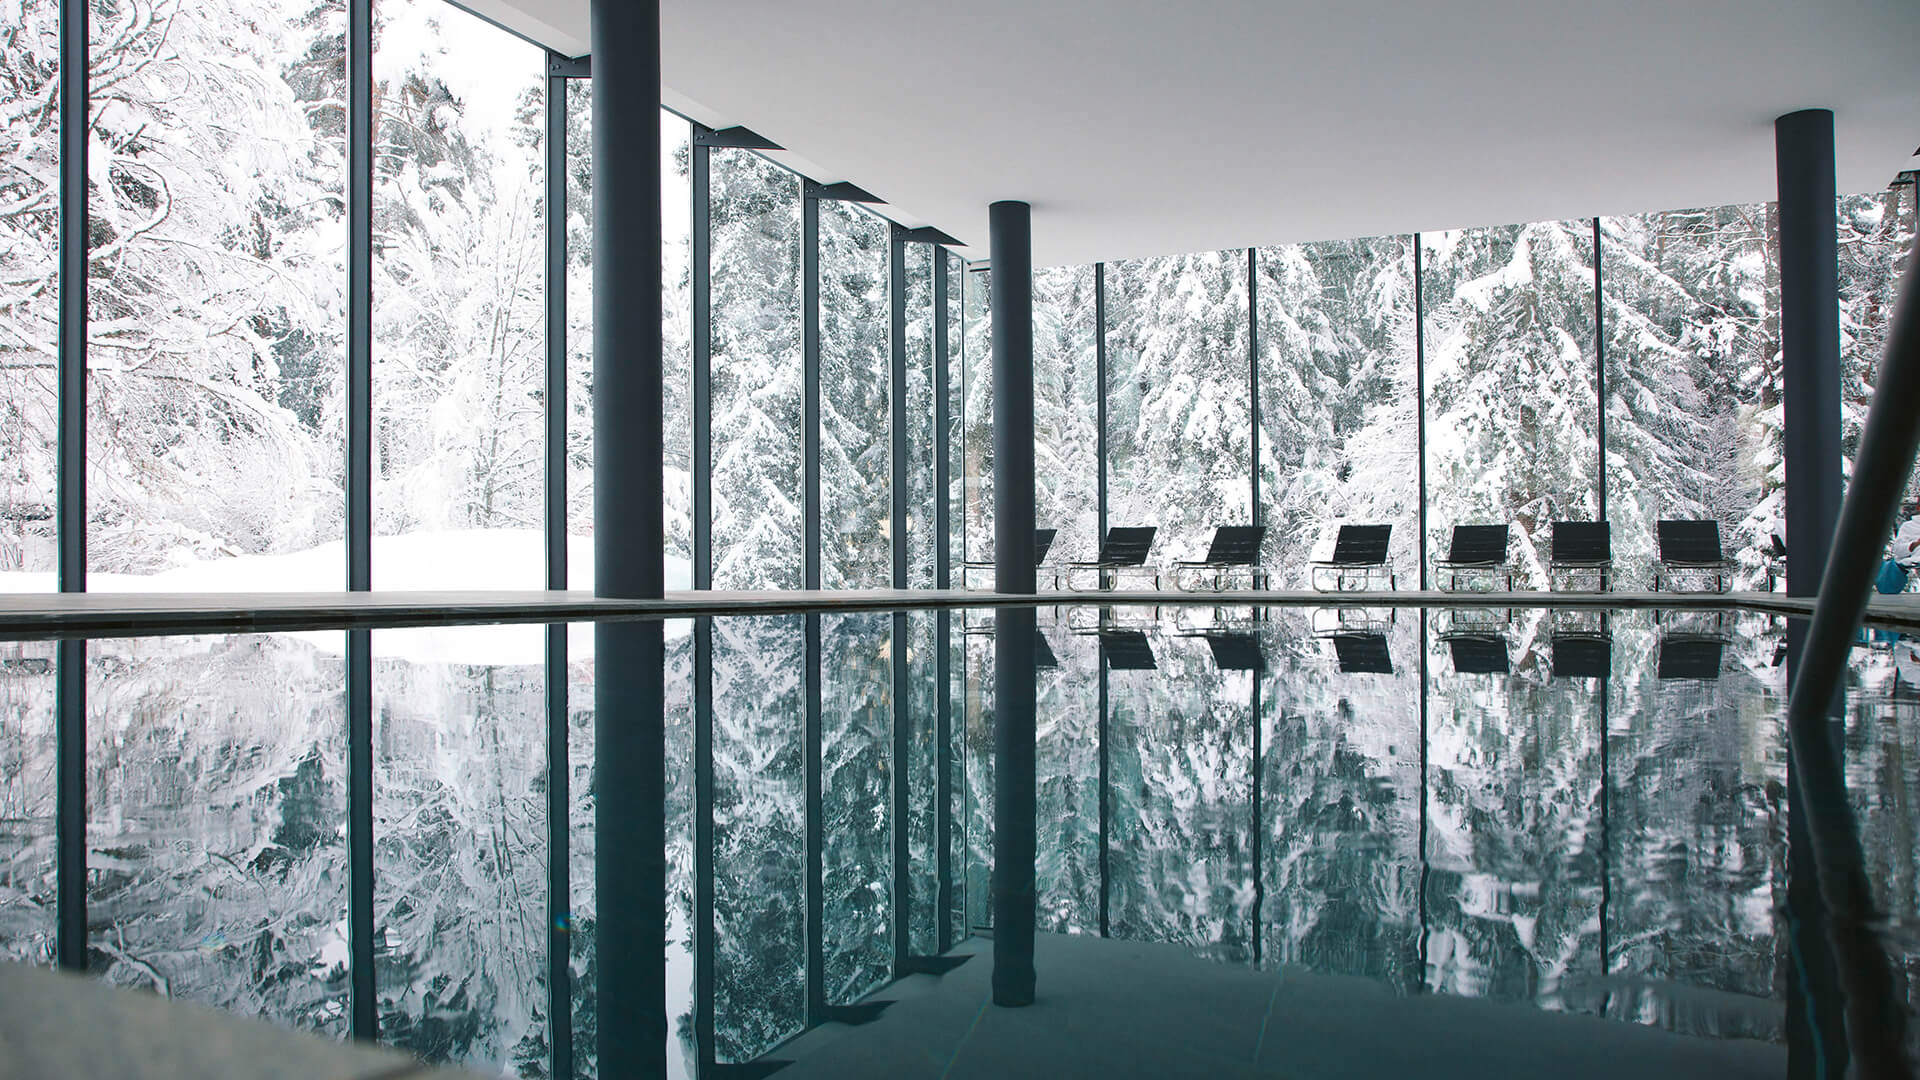 indoor pool with snow covered trees through the glass windows. the snow covered trees are reflected in the pool